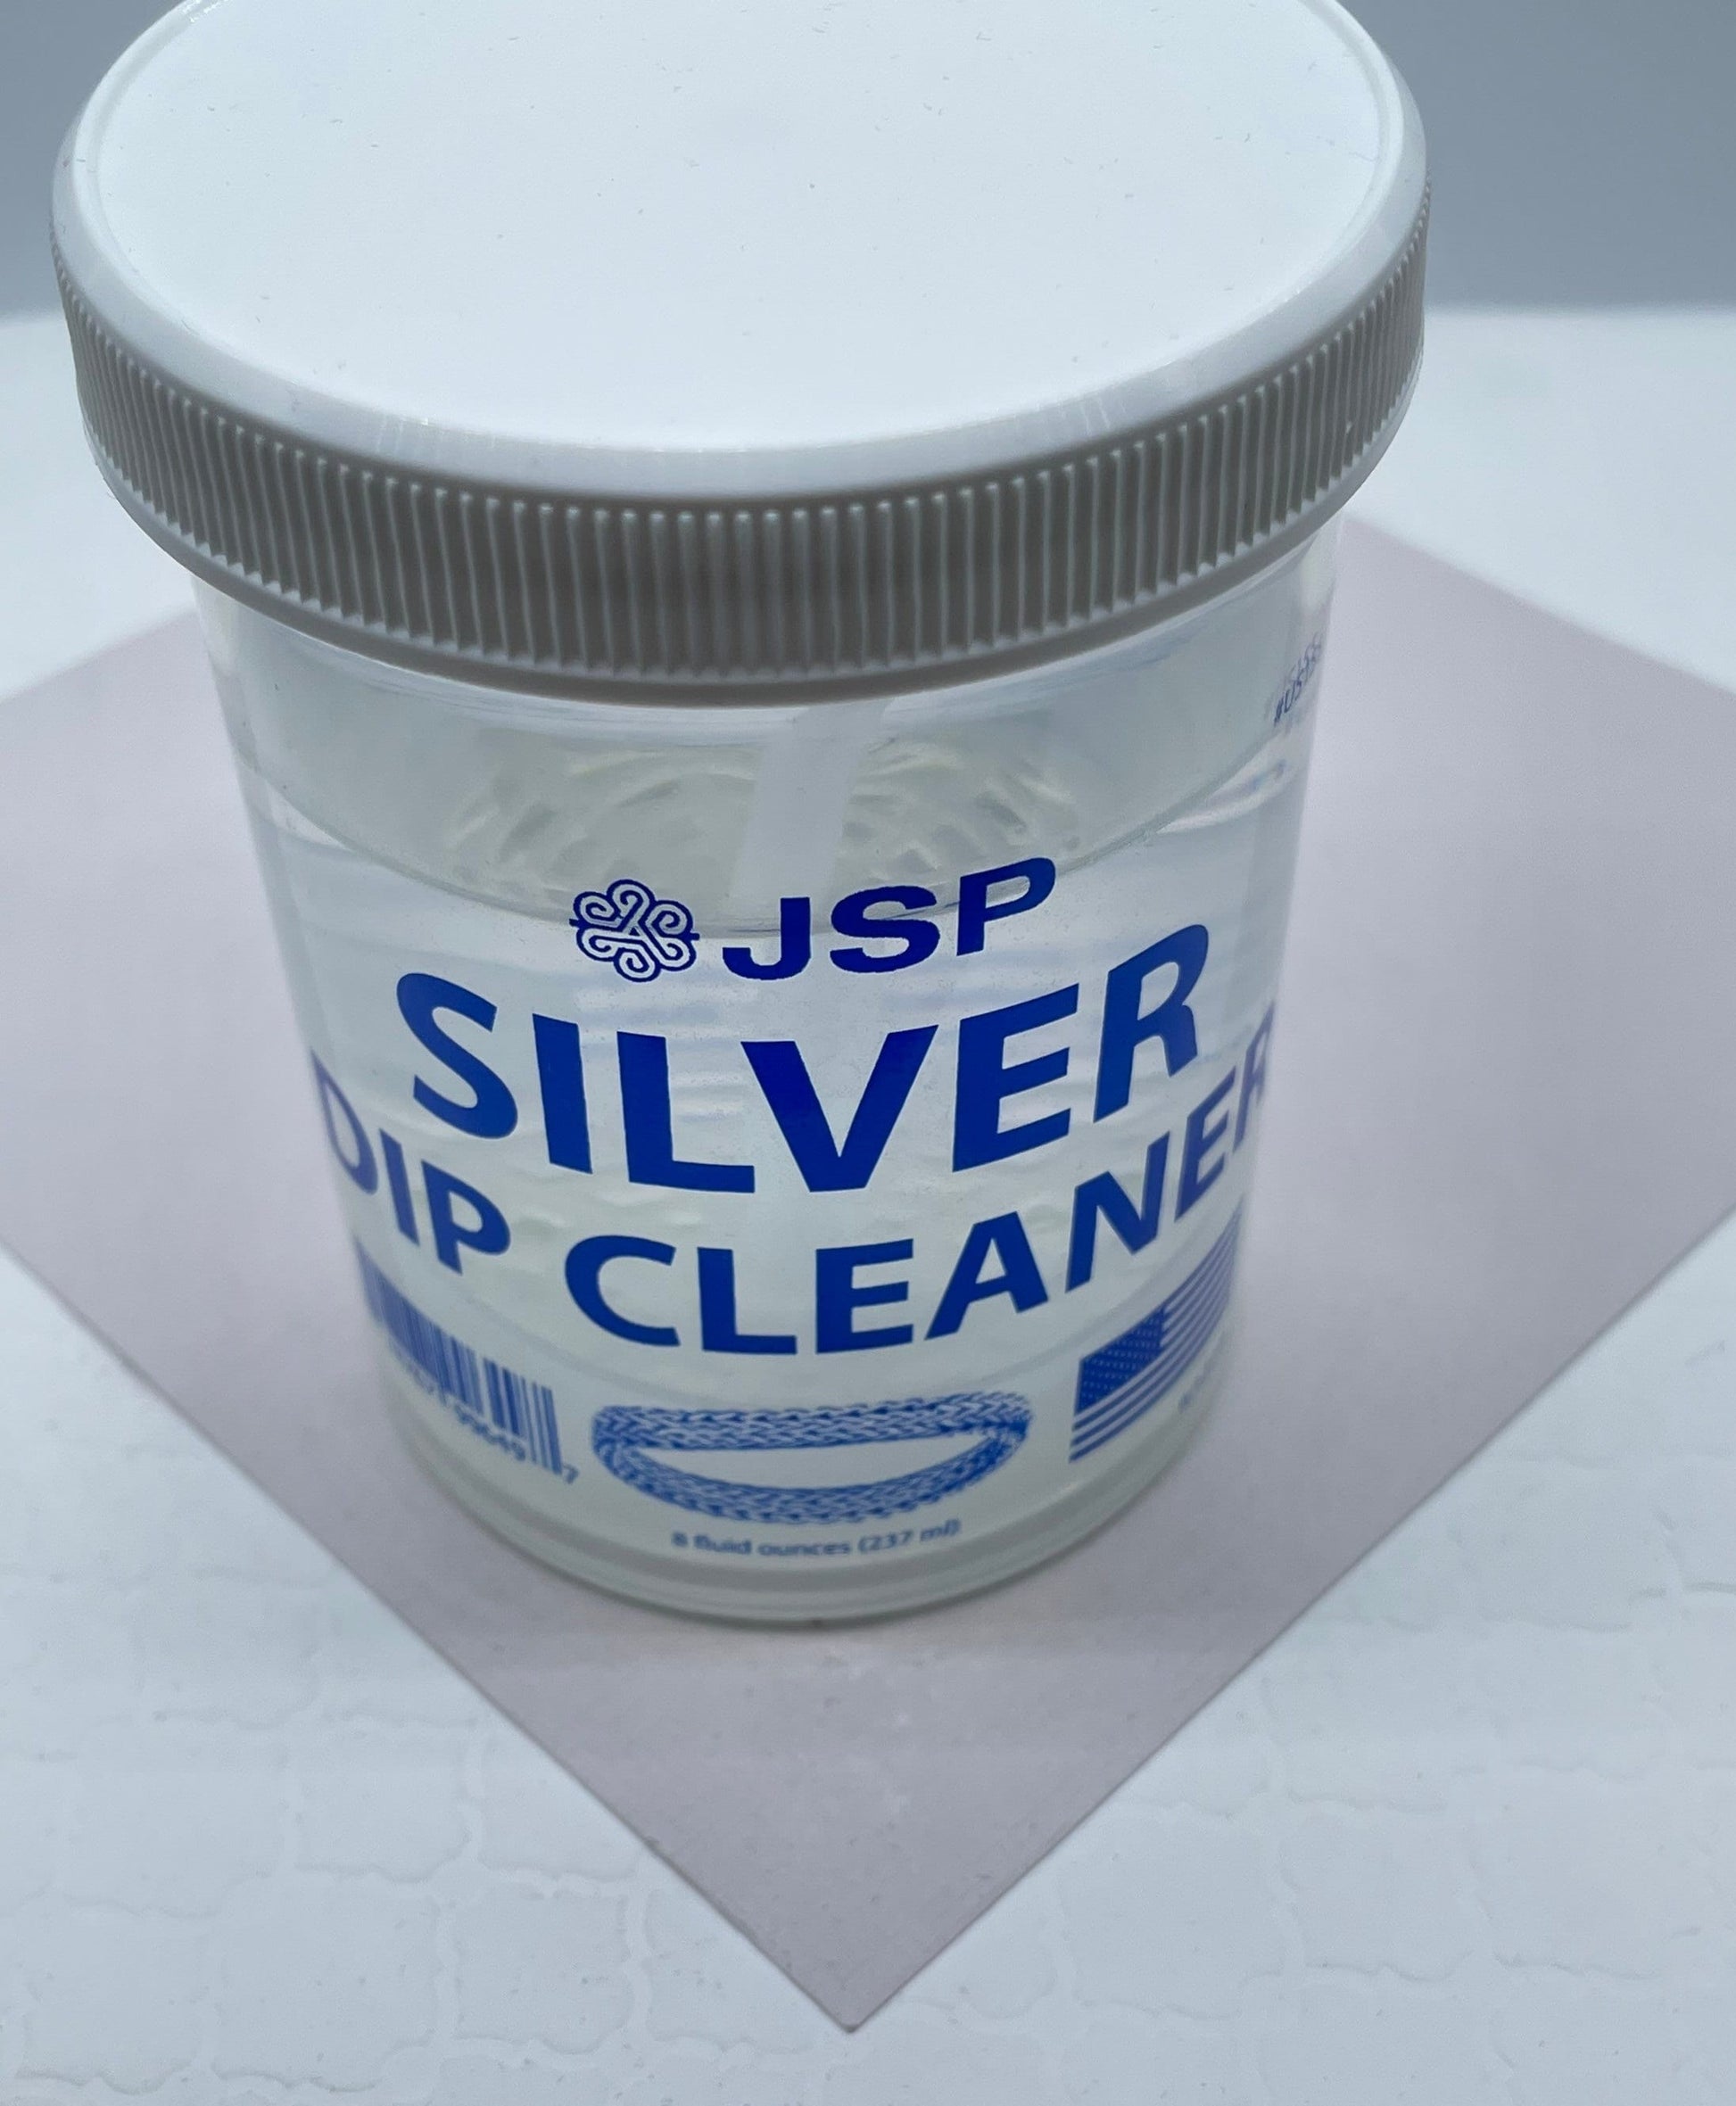 Silver Dip Jewelry Cleaner, Cloth Cleaning Shines And Protect – Bella Joias  Miami